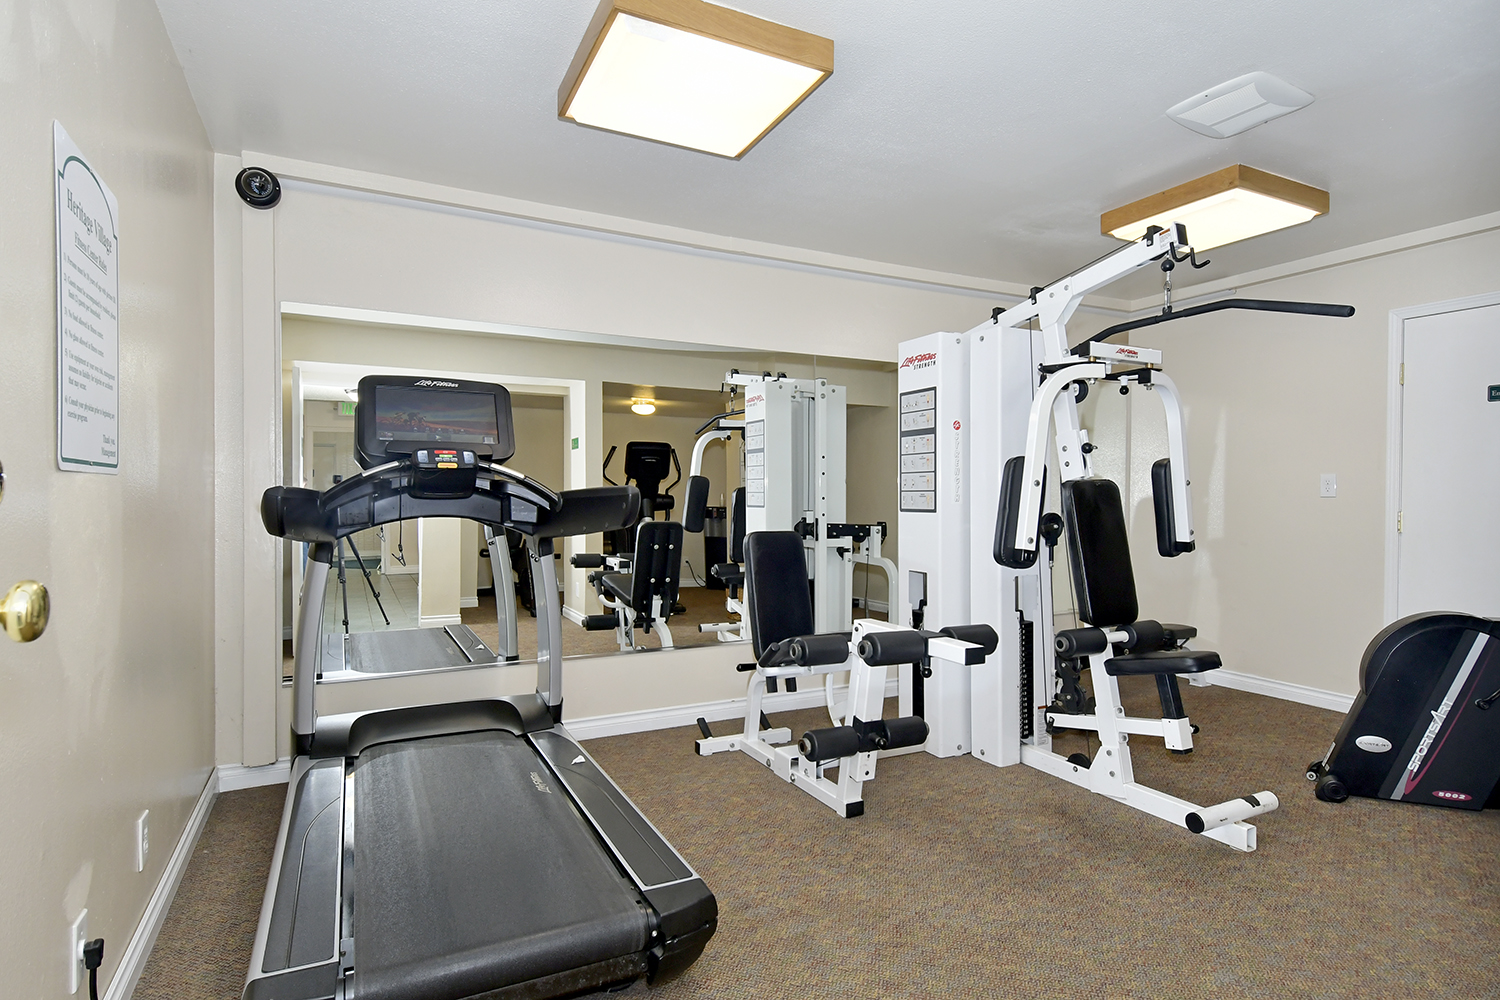 Heritage Village, an all age manufactured home community has fitness center with treadmill and weight machine.